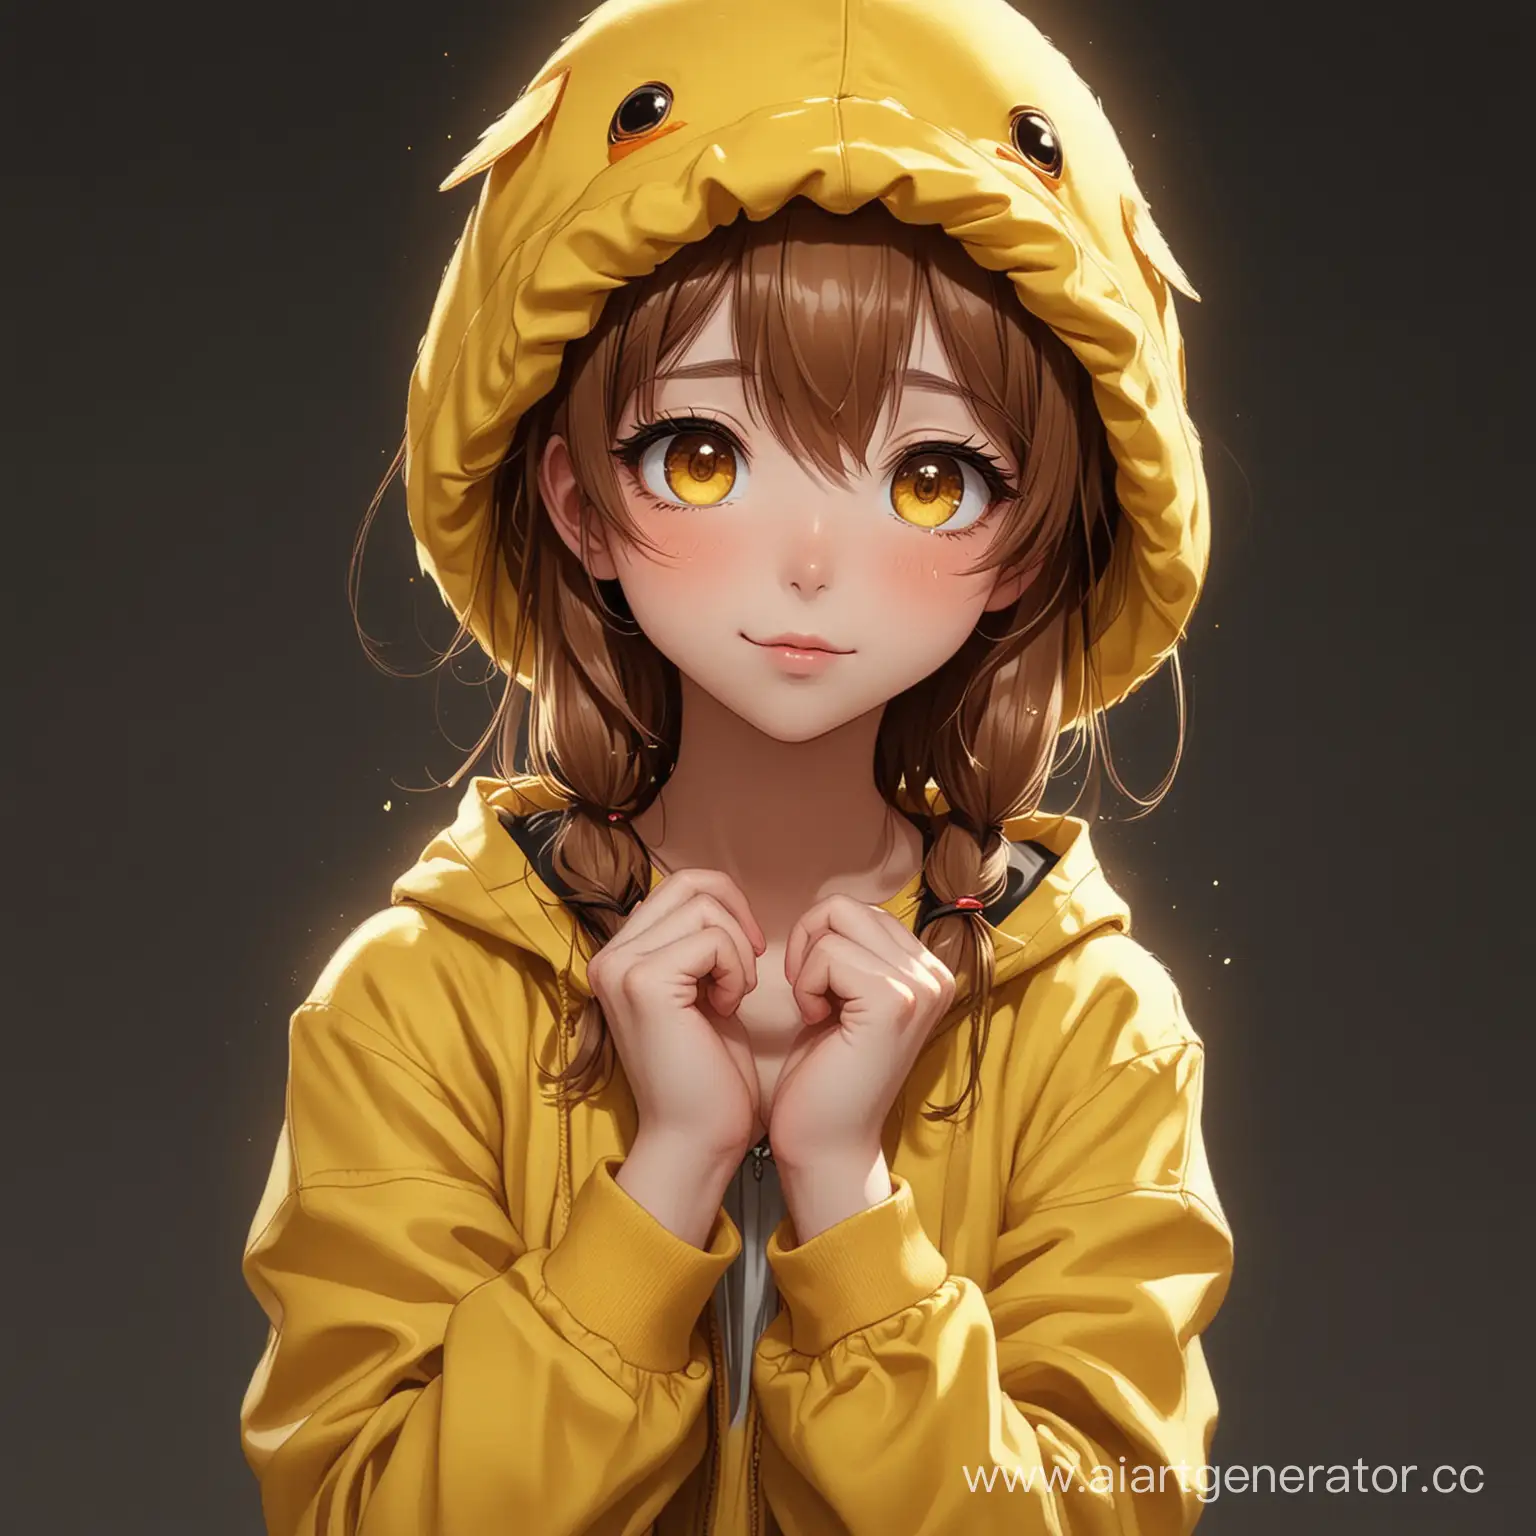 Anime-Girl-with-Duck-Hat-on-Black-Background-in-Yellow-Attire